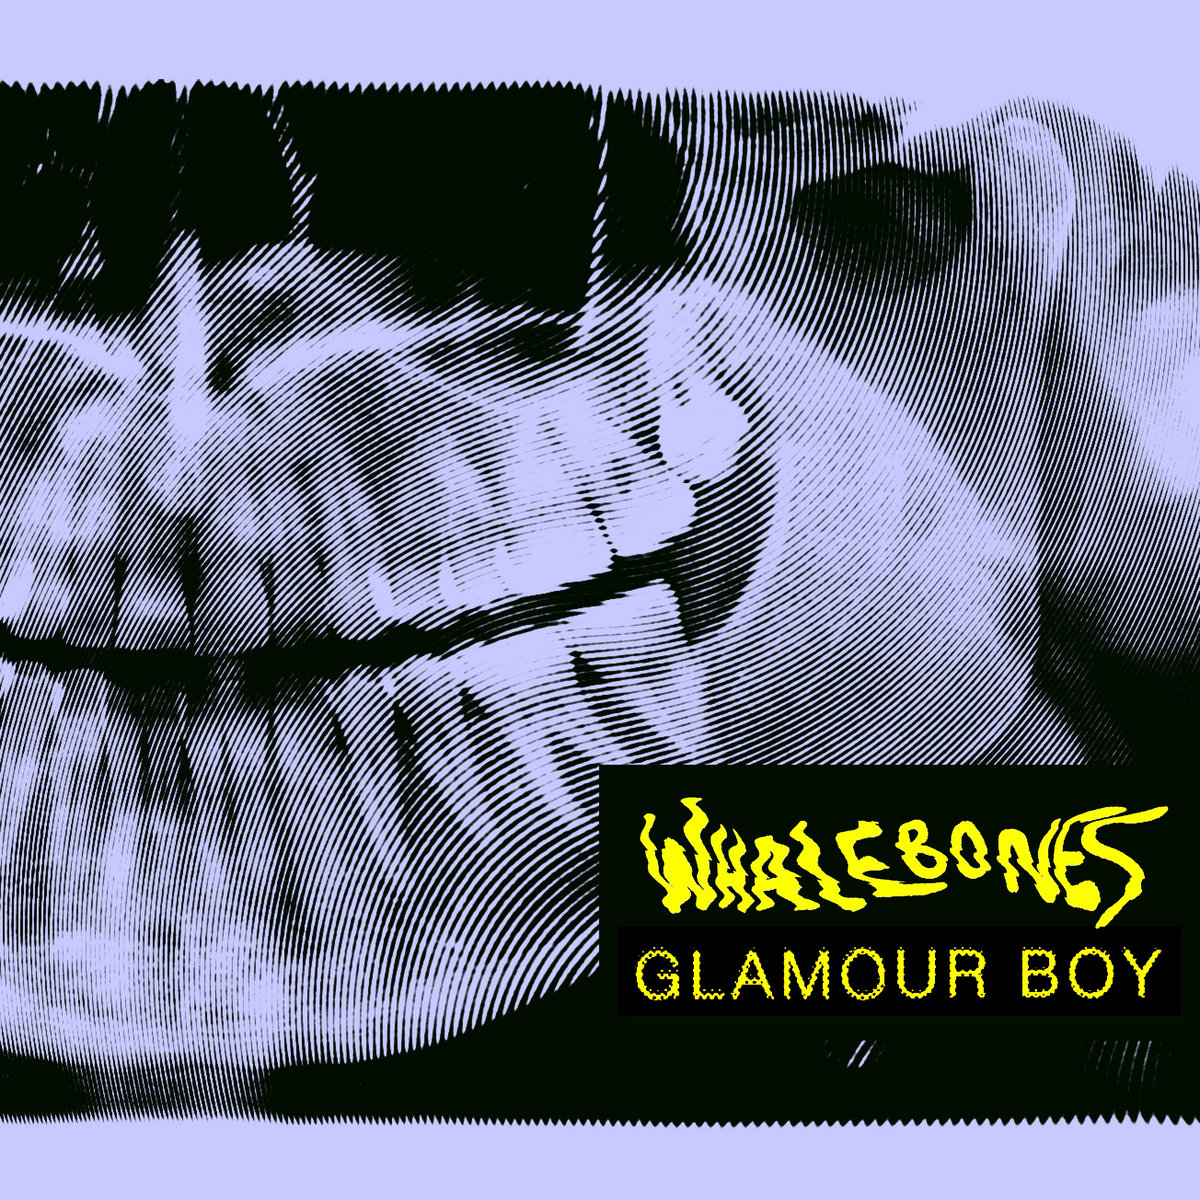 Cover art from GLAMOUR BOY by Whalebones